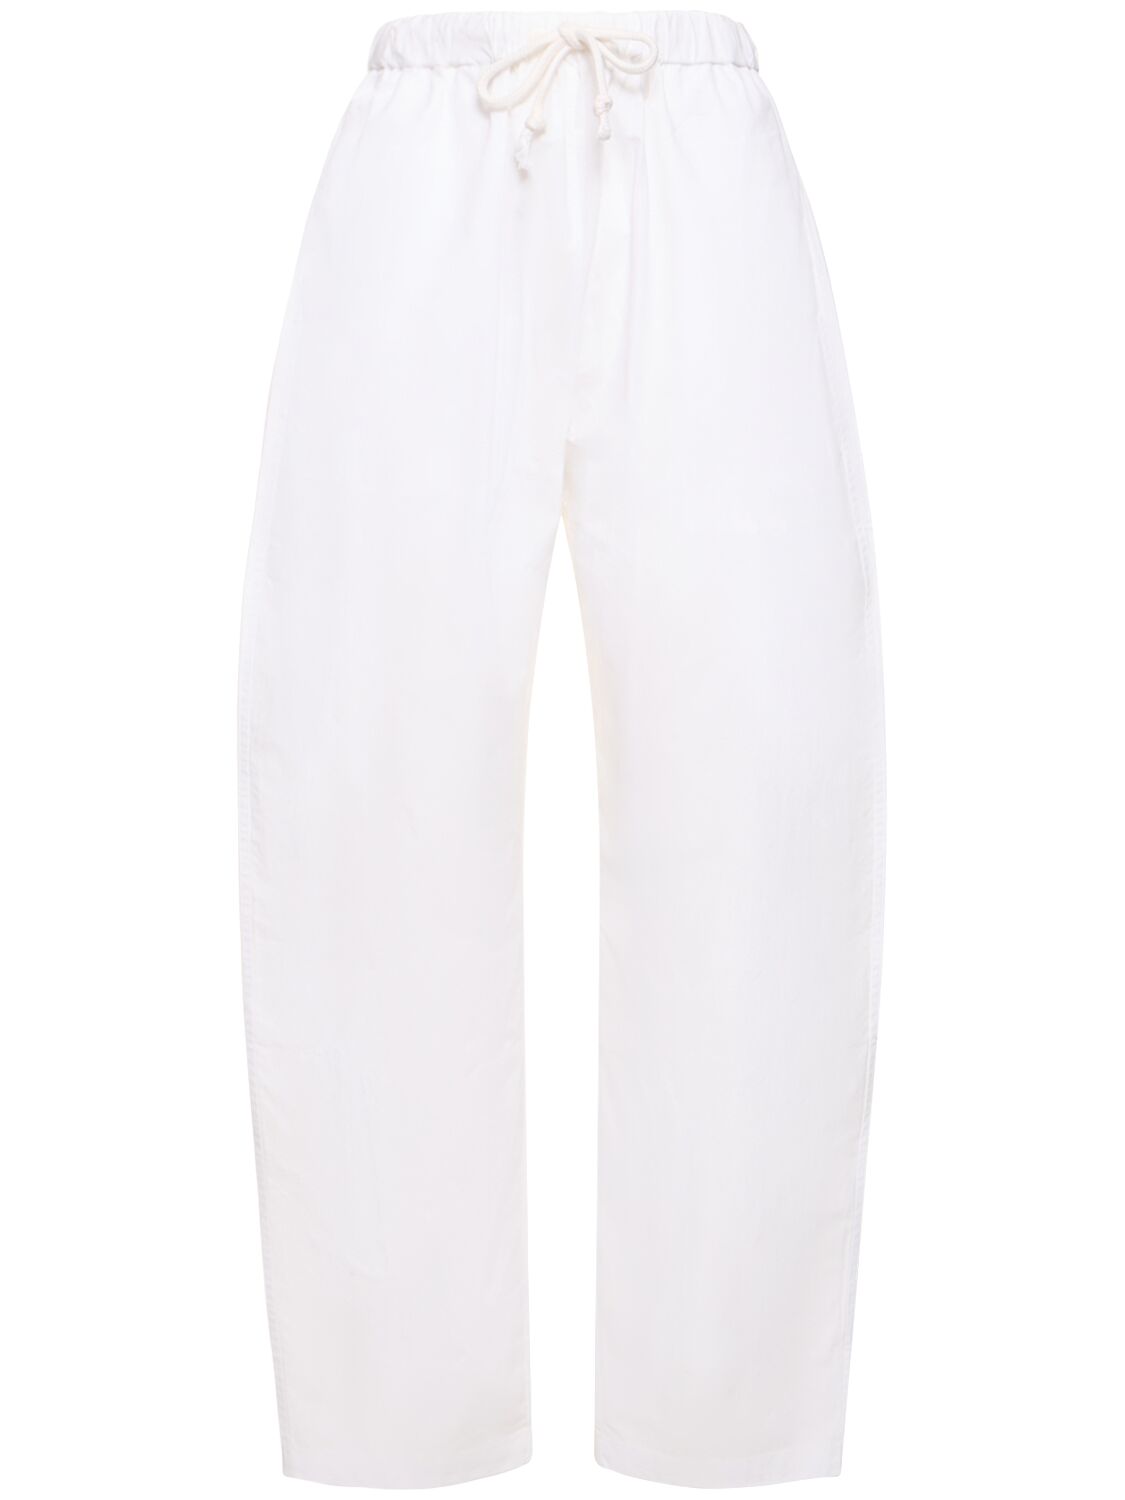 The Clarence Cotton Jogger Pants